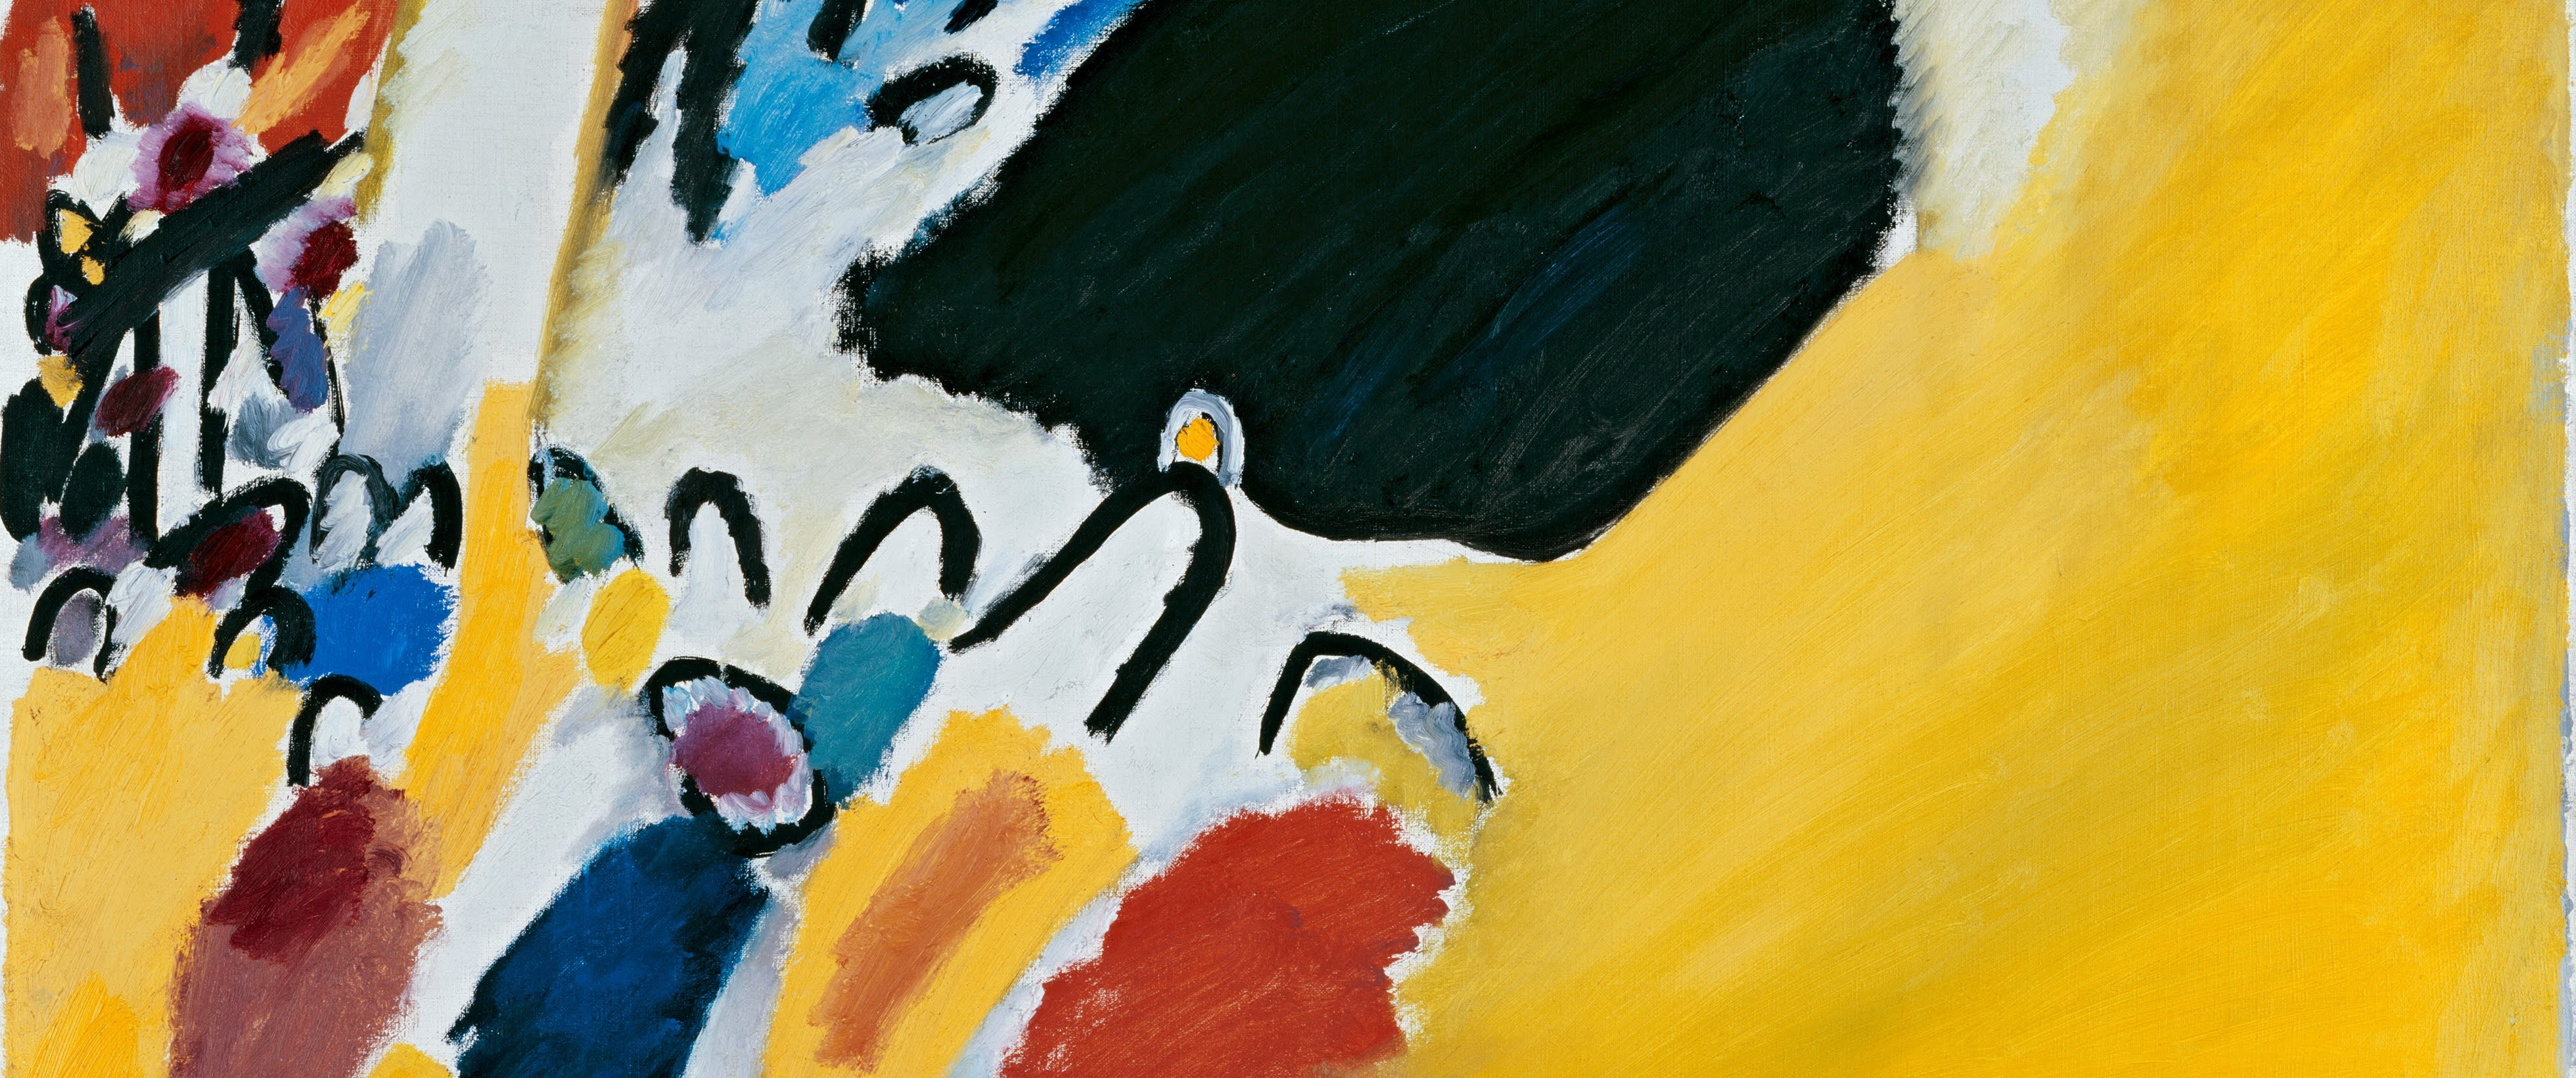 Painting Wassily Kandinsky Oil Painting 3920x1641